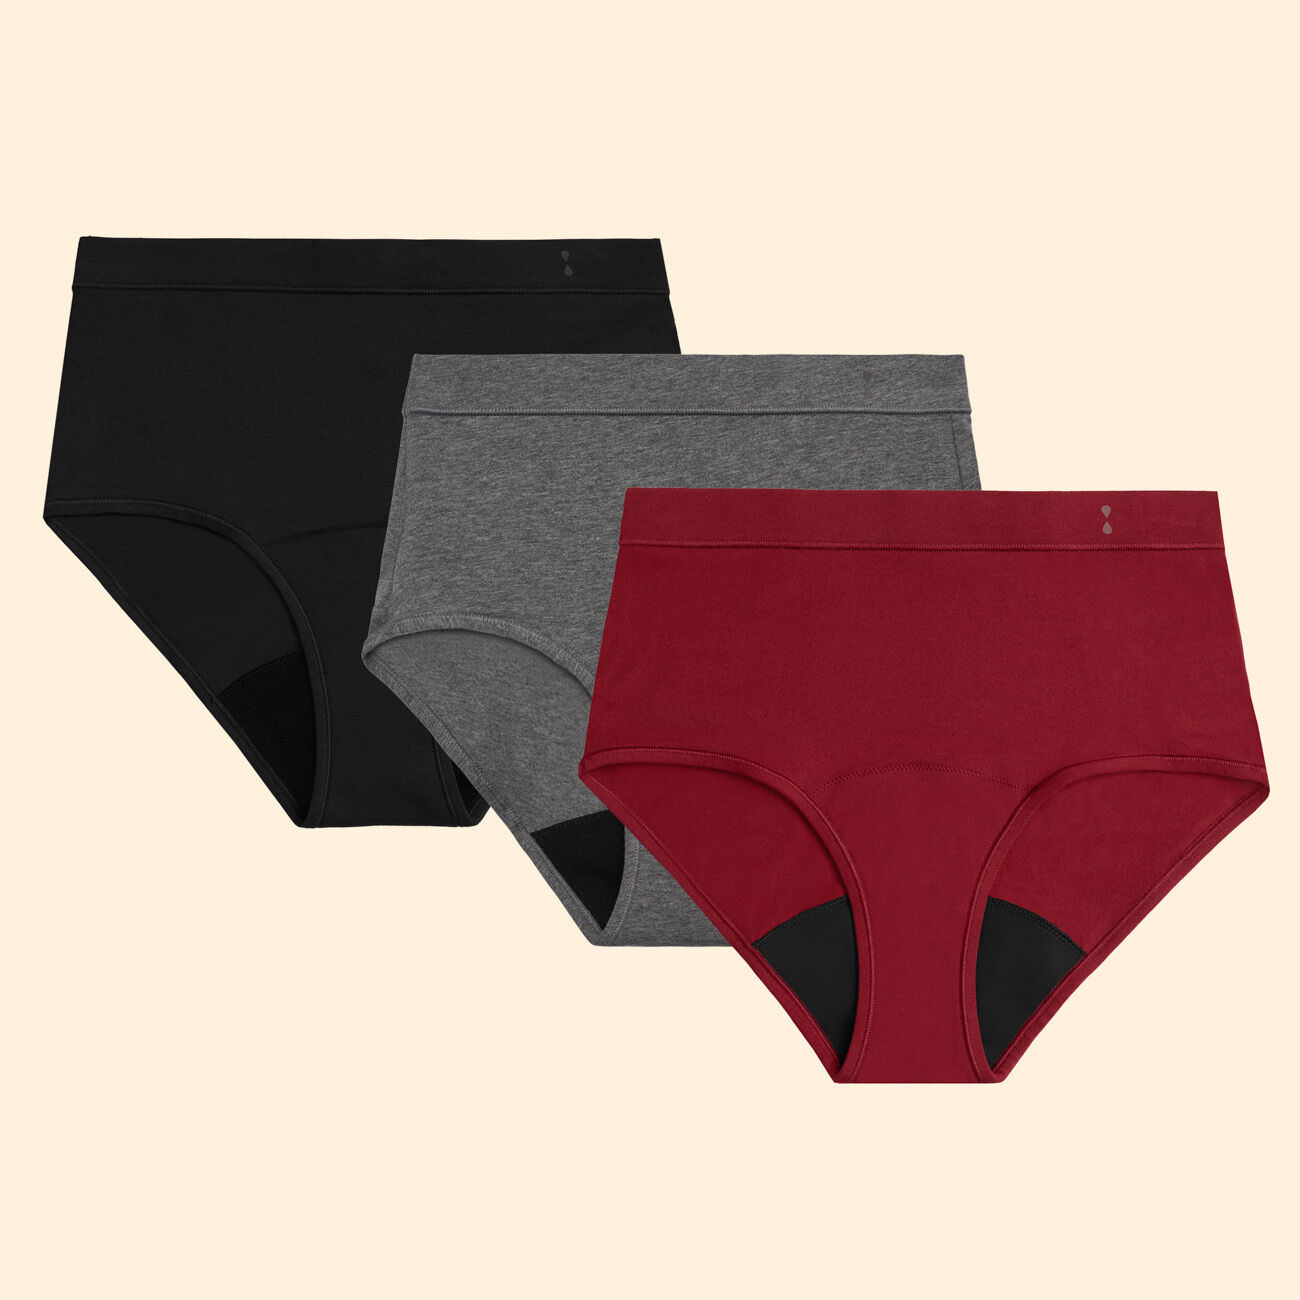 Thinx For All Period Underwear Brief Panty Moderate Absorbency